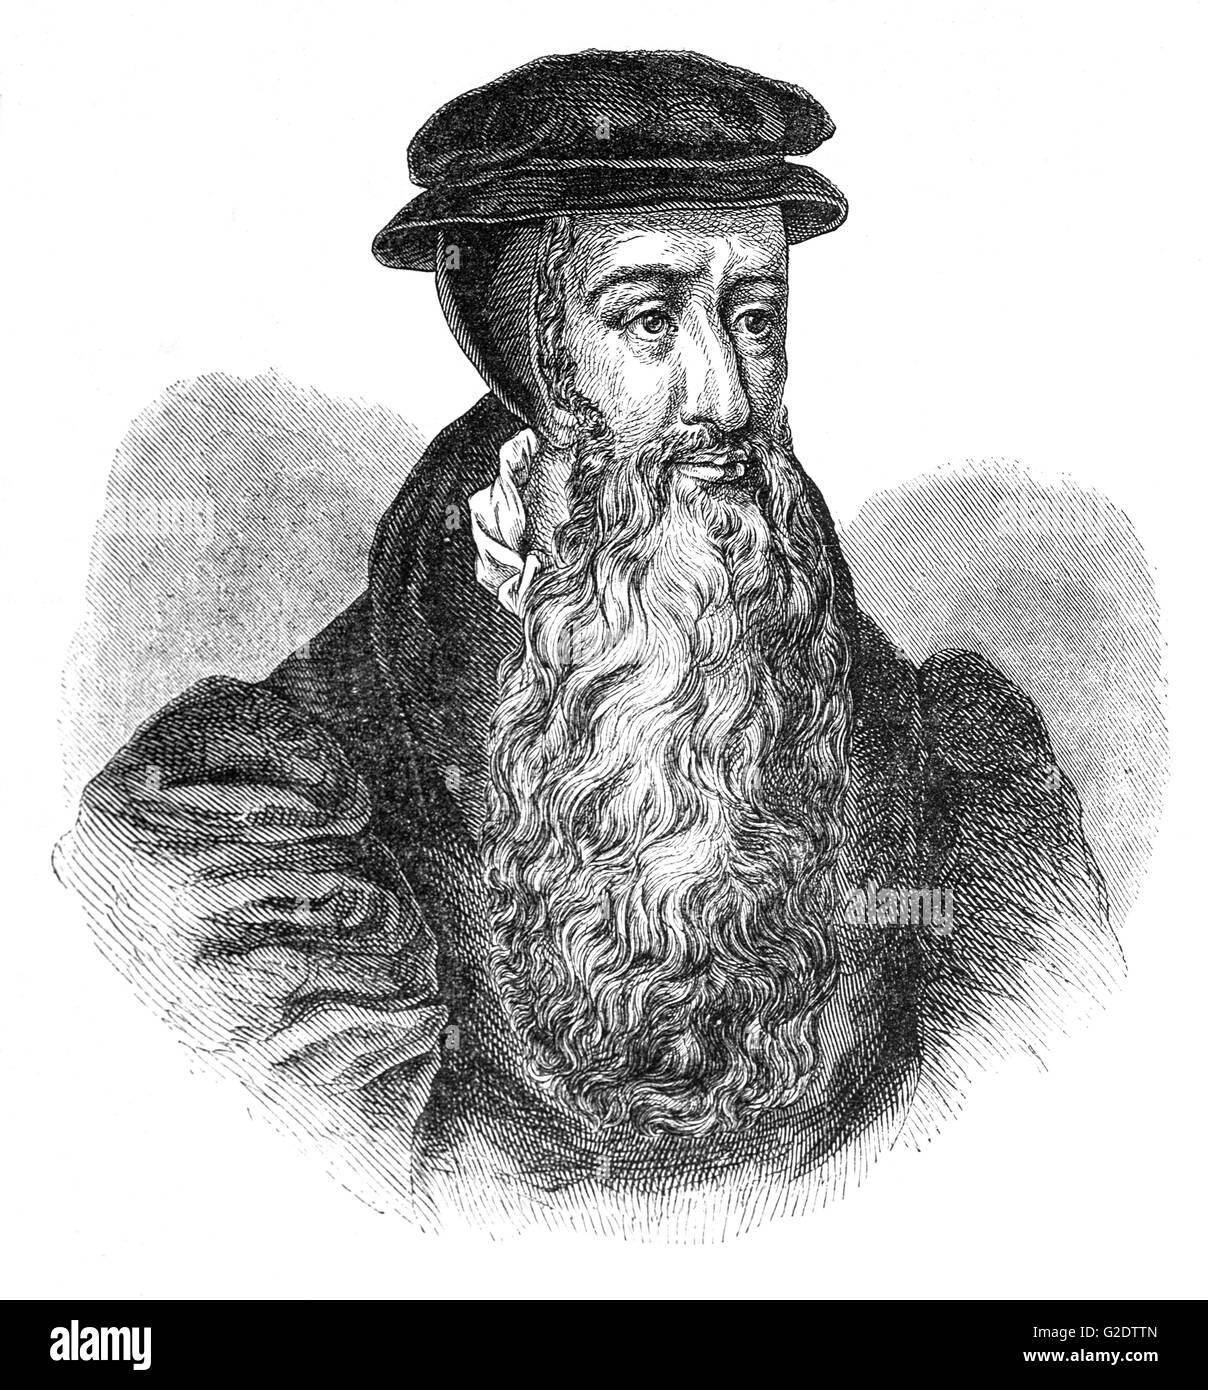 John Knox (1513 – 1572) was a Scottish clergyman, theologian, and writer who was a leader of the Protestant Reformation and is considered the founder of the Presbyterian denomination in Scotland. Stock Photo